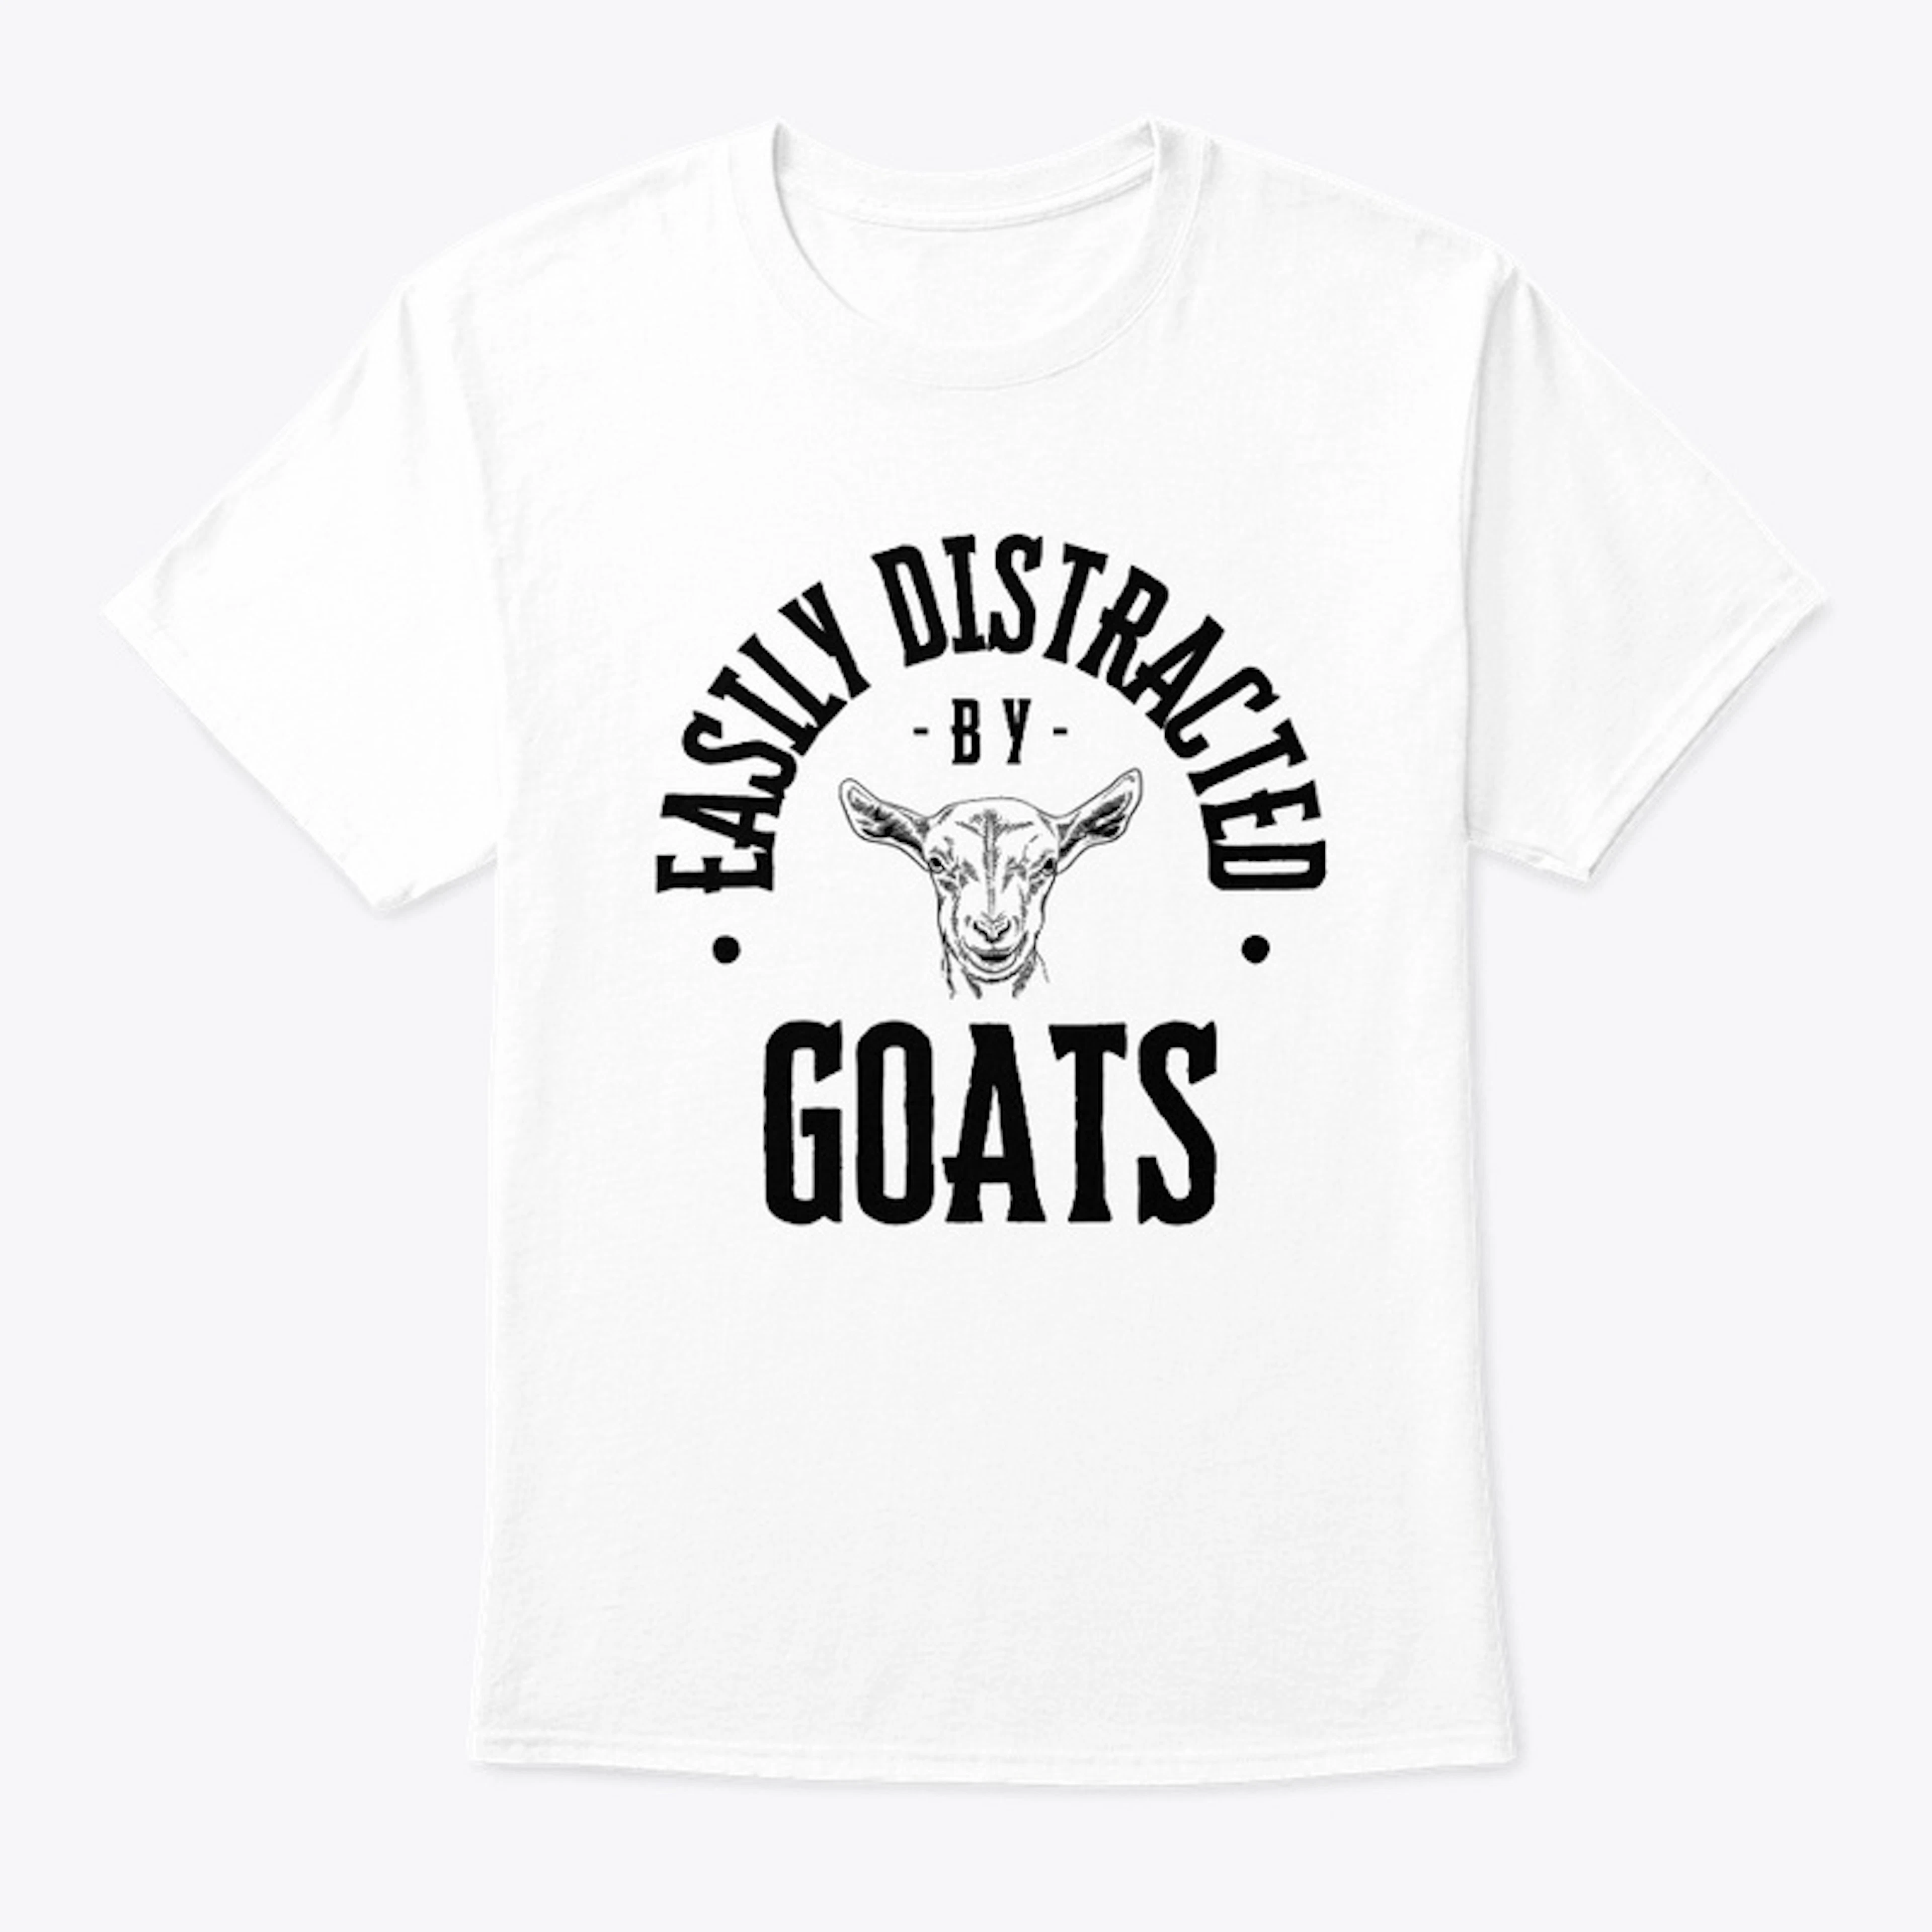 Easily Distracted By Goats T-Shirt